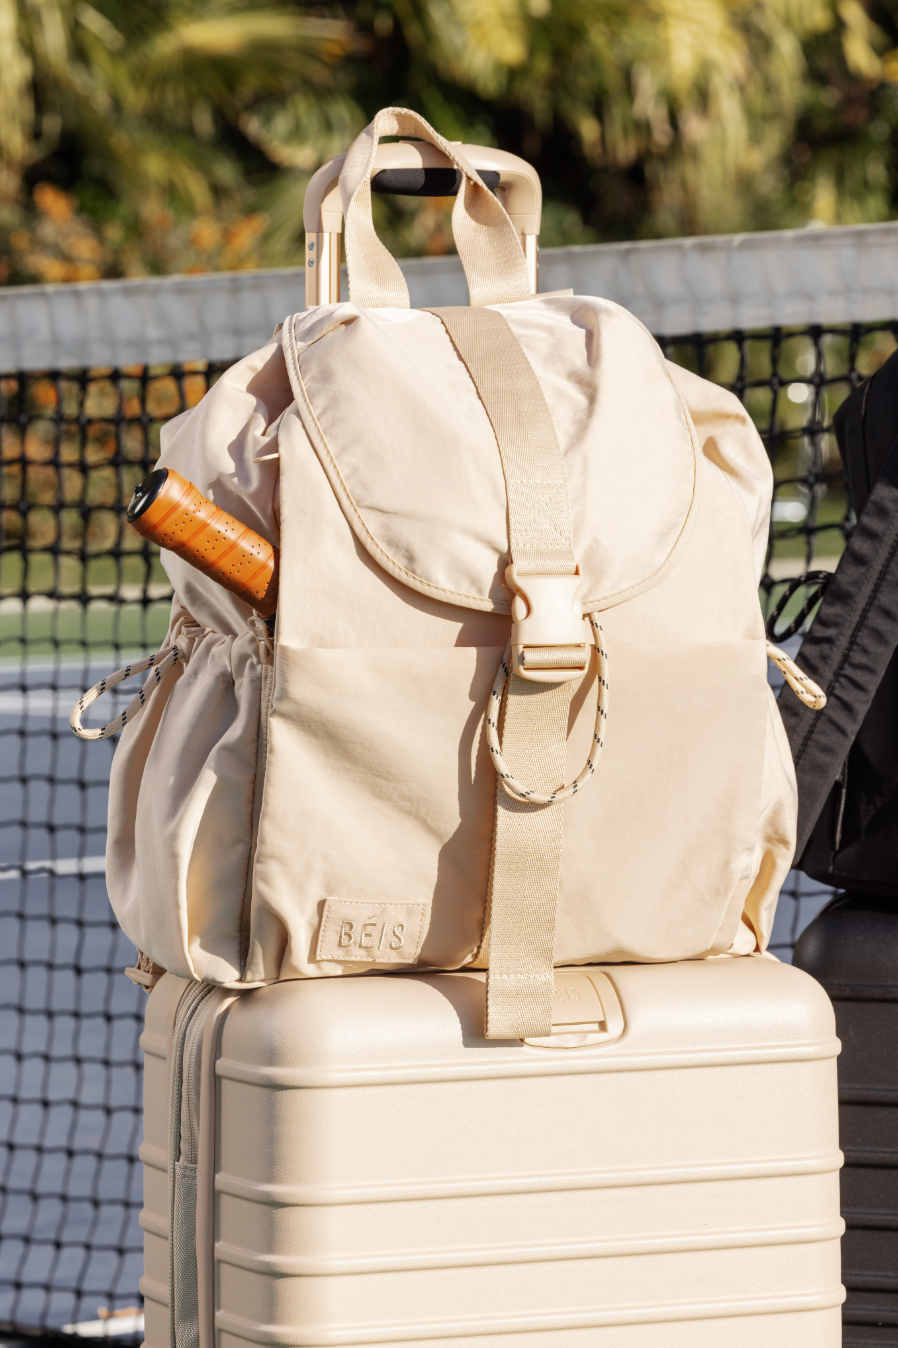 Beige beis backpack with a tennis racquet inside On top of a beige suitcase on a tennis court